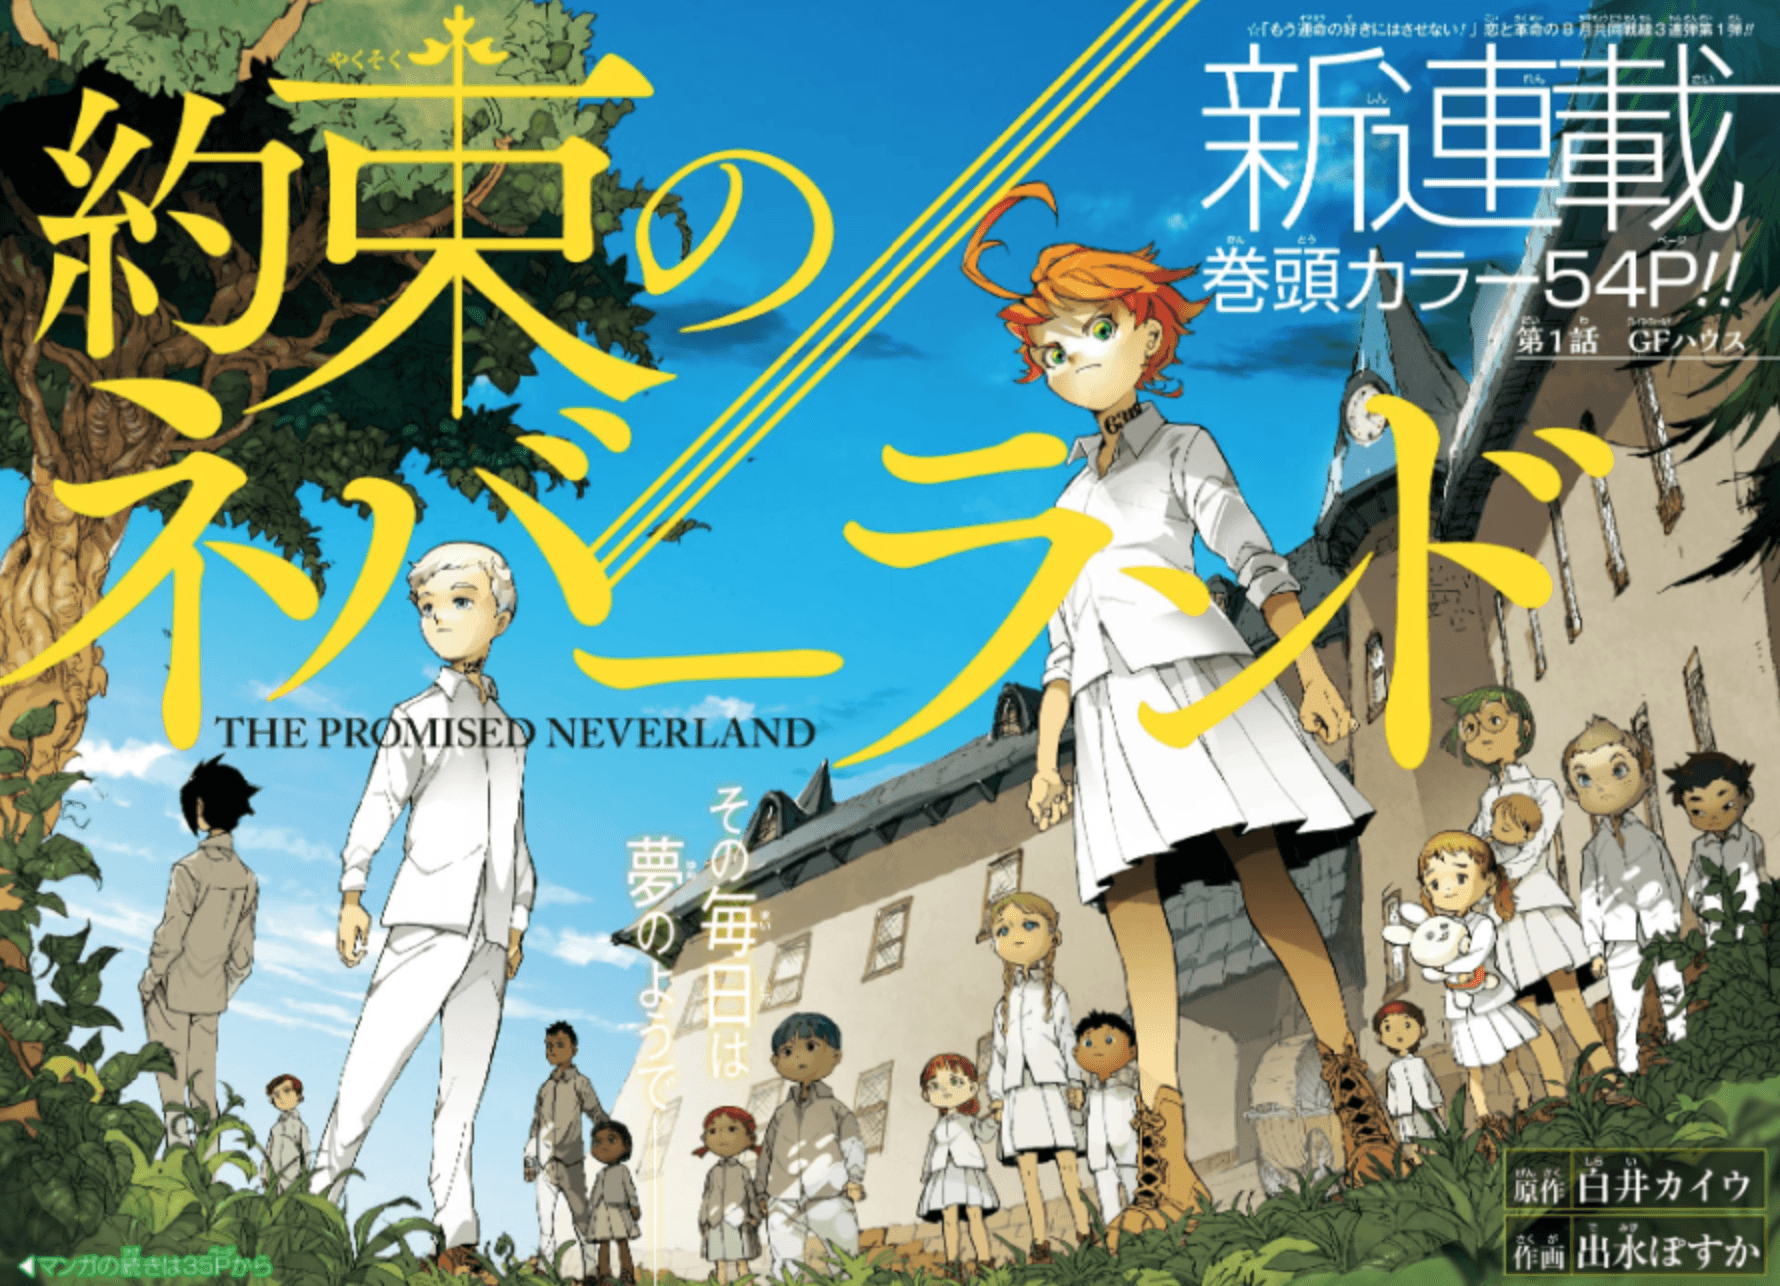 The Promised Neverland Wallpaper The Promised Neverland 2K wallpapers